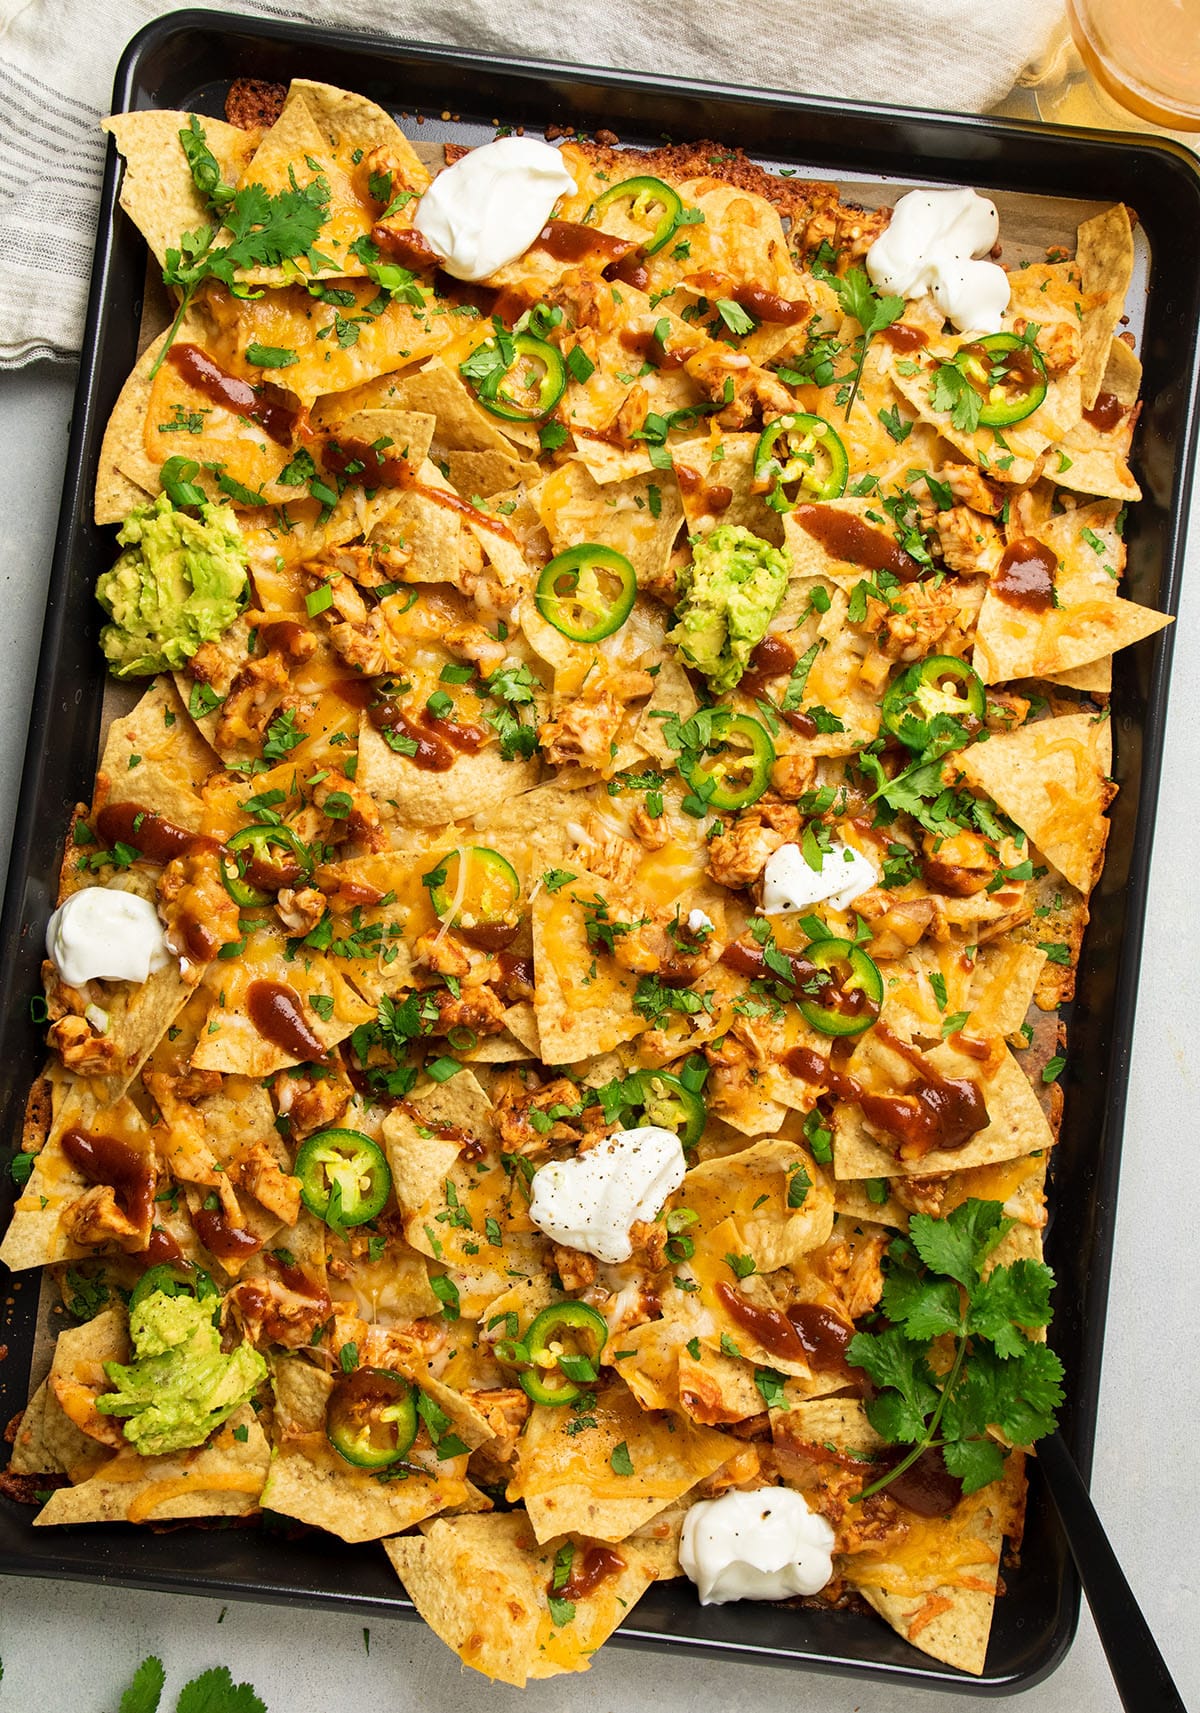 Nachos with chicken, barbecue sauce, and jalapenos.